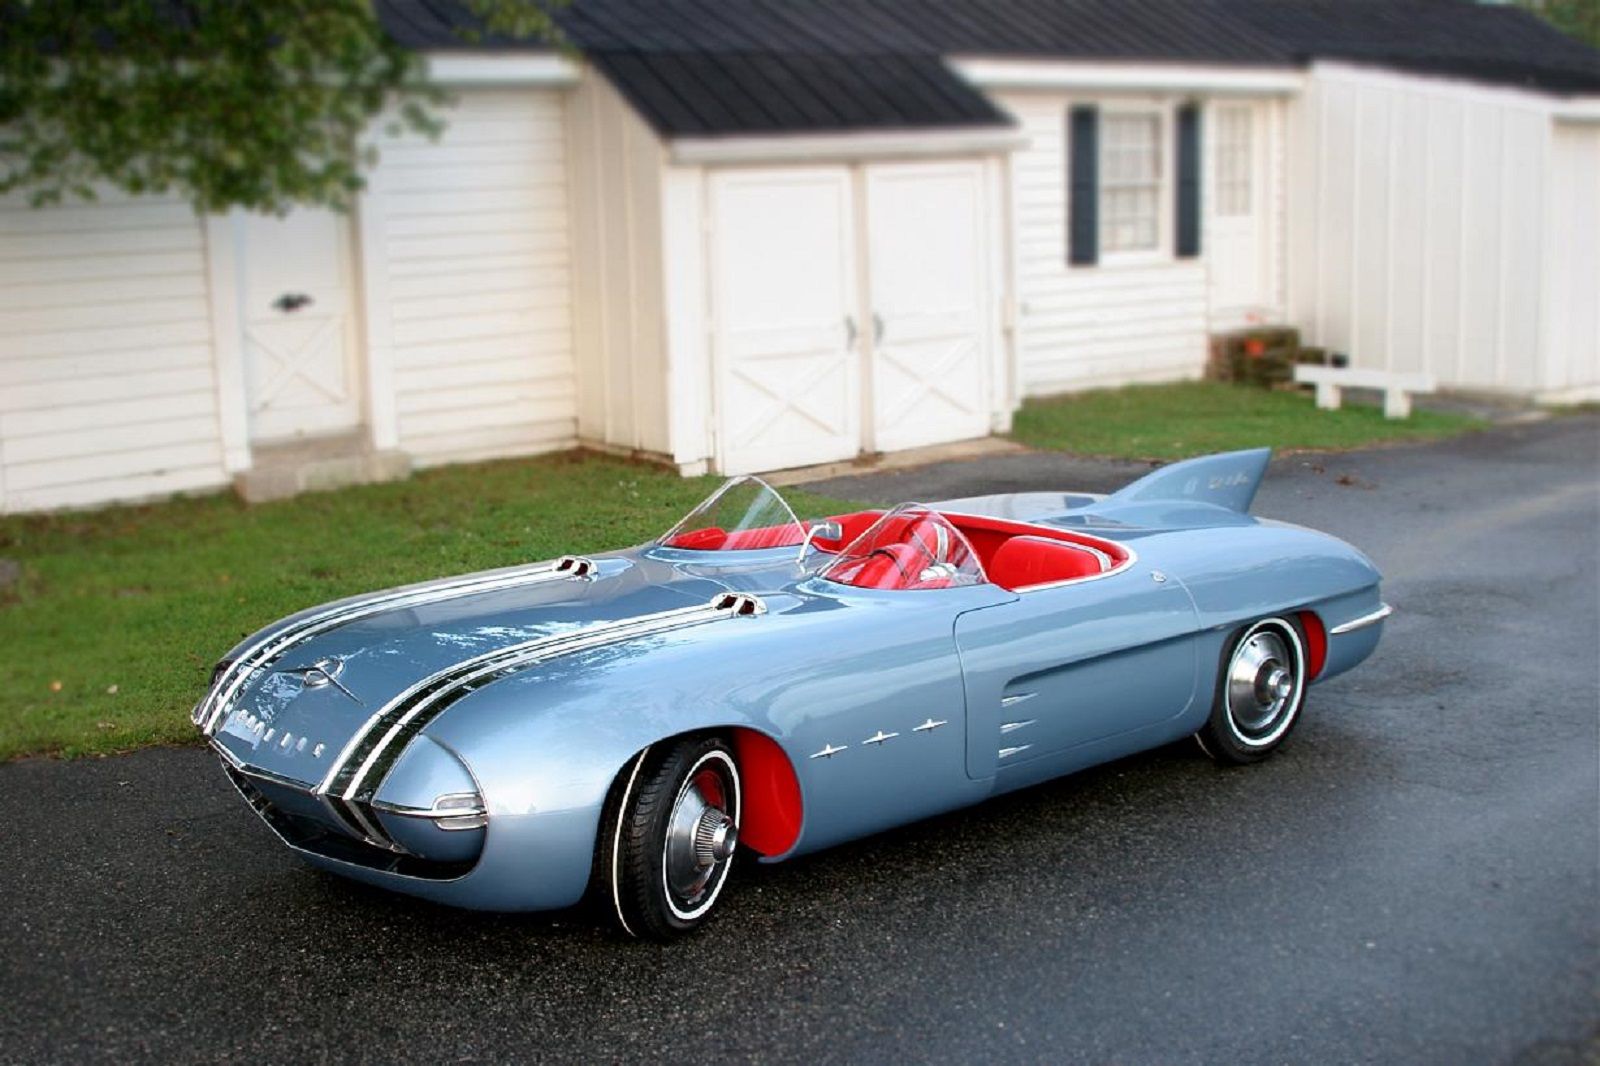 30 incredibly bonkers and beautiful cars from the 1950s to now image 29